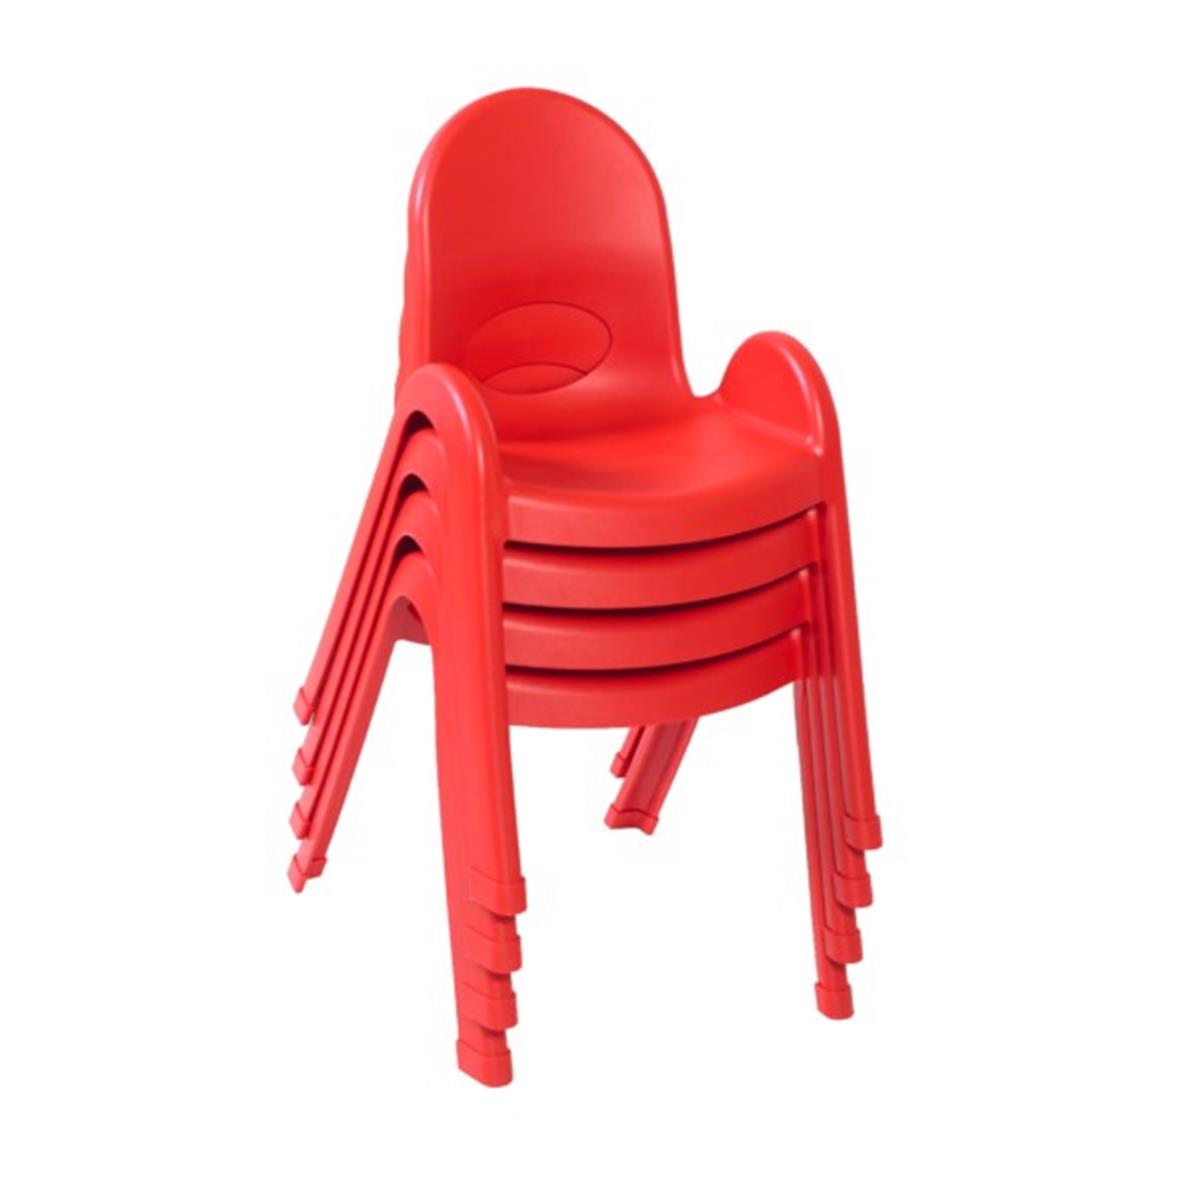 Ab7713pr4 13 In. Value Stack Child Chair, Candy Apple Red - Pack Of 4